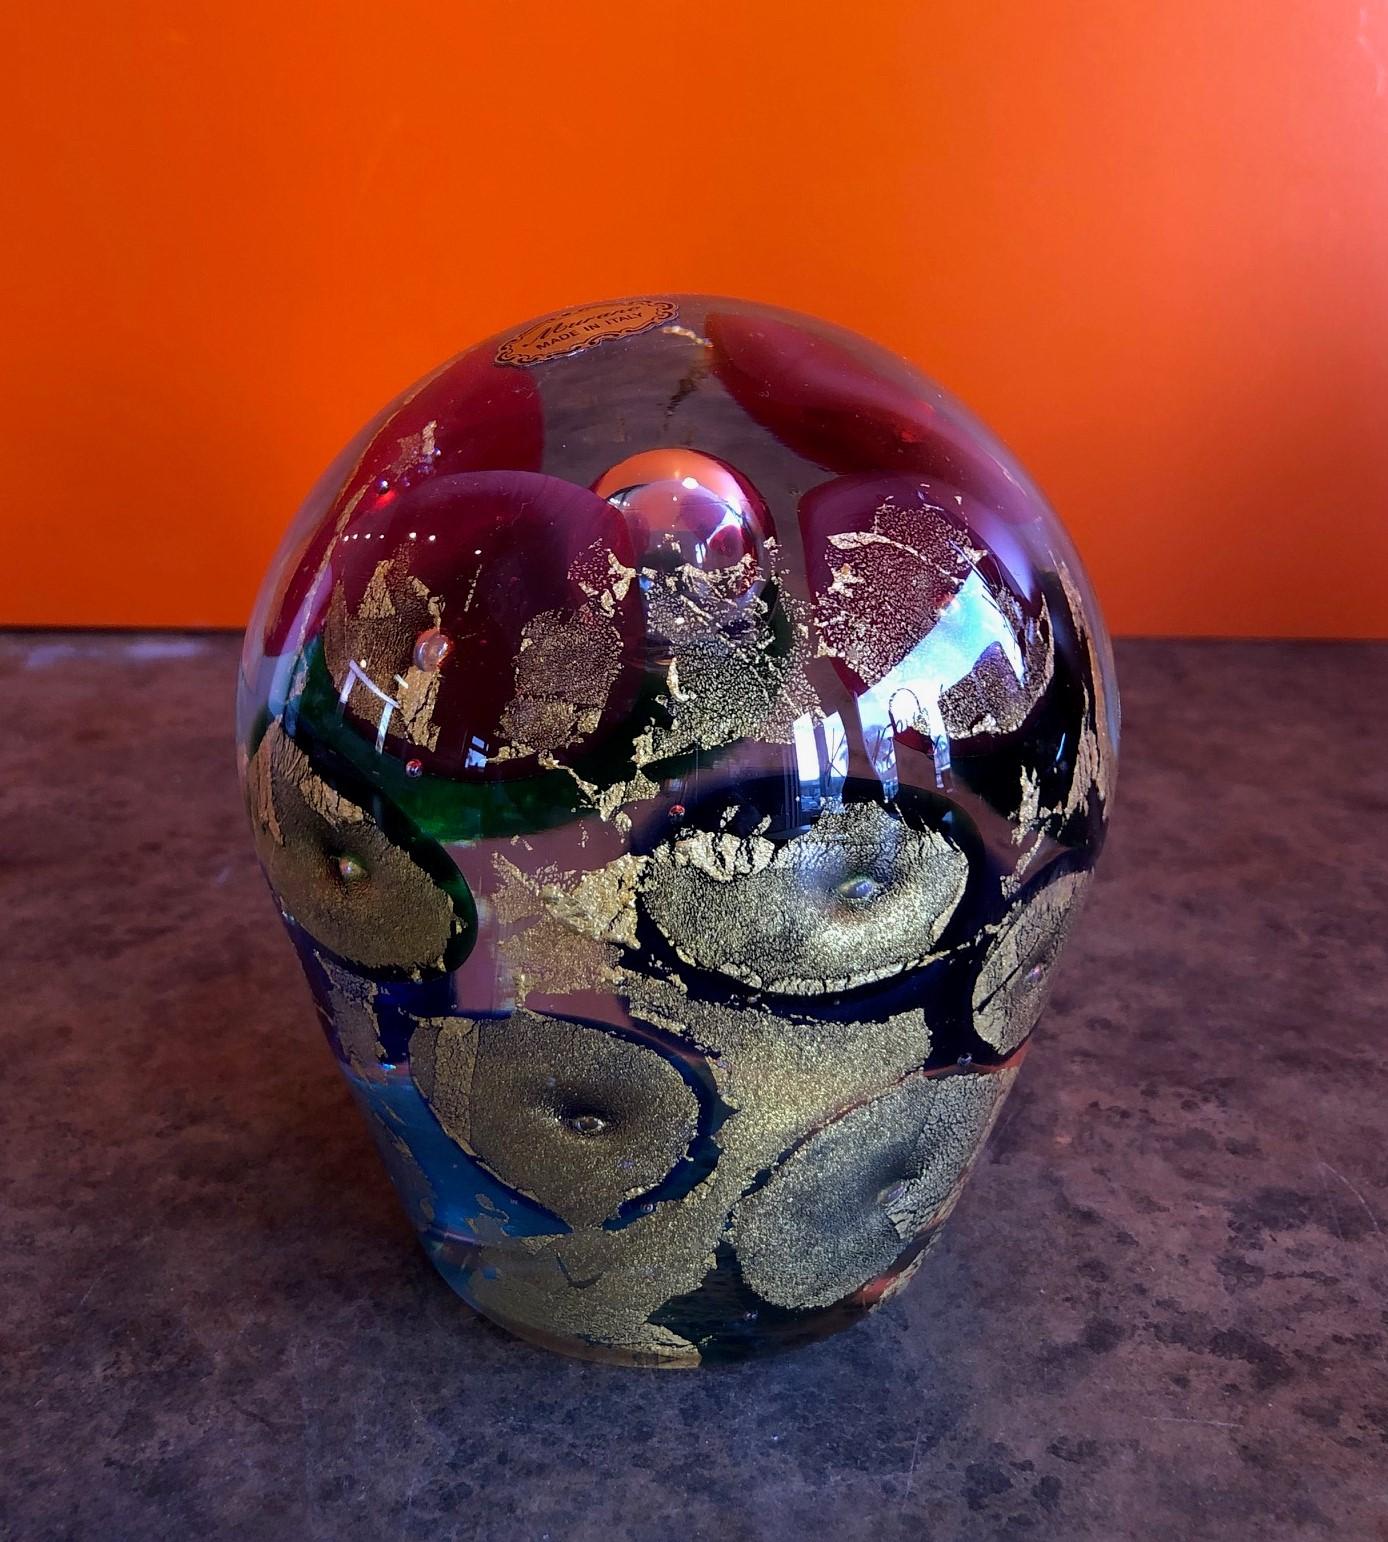 Vintage Sommerso orb sculpture / large paperweight by Murano Glass, circa 1970s. The outline of the sculpture is clear blown glass with an inner core of shimmering, sparkling gold circles. Truly a gorgeous piece; much more impressive in person than